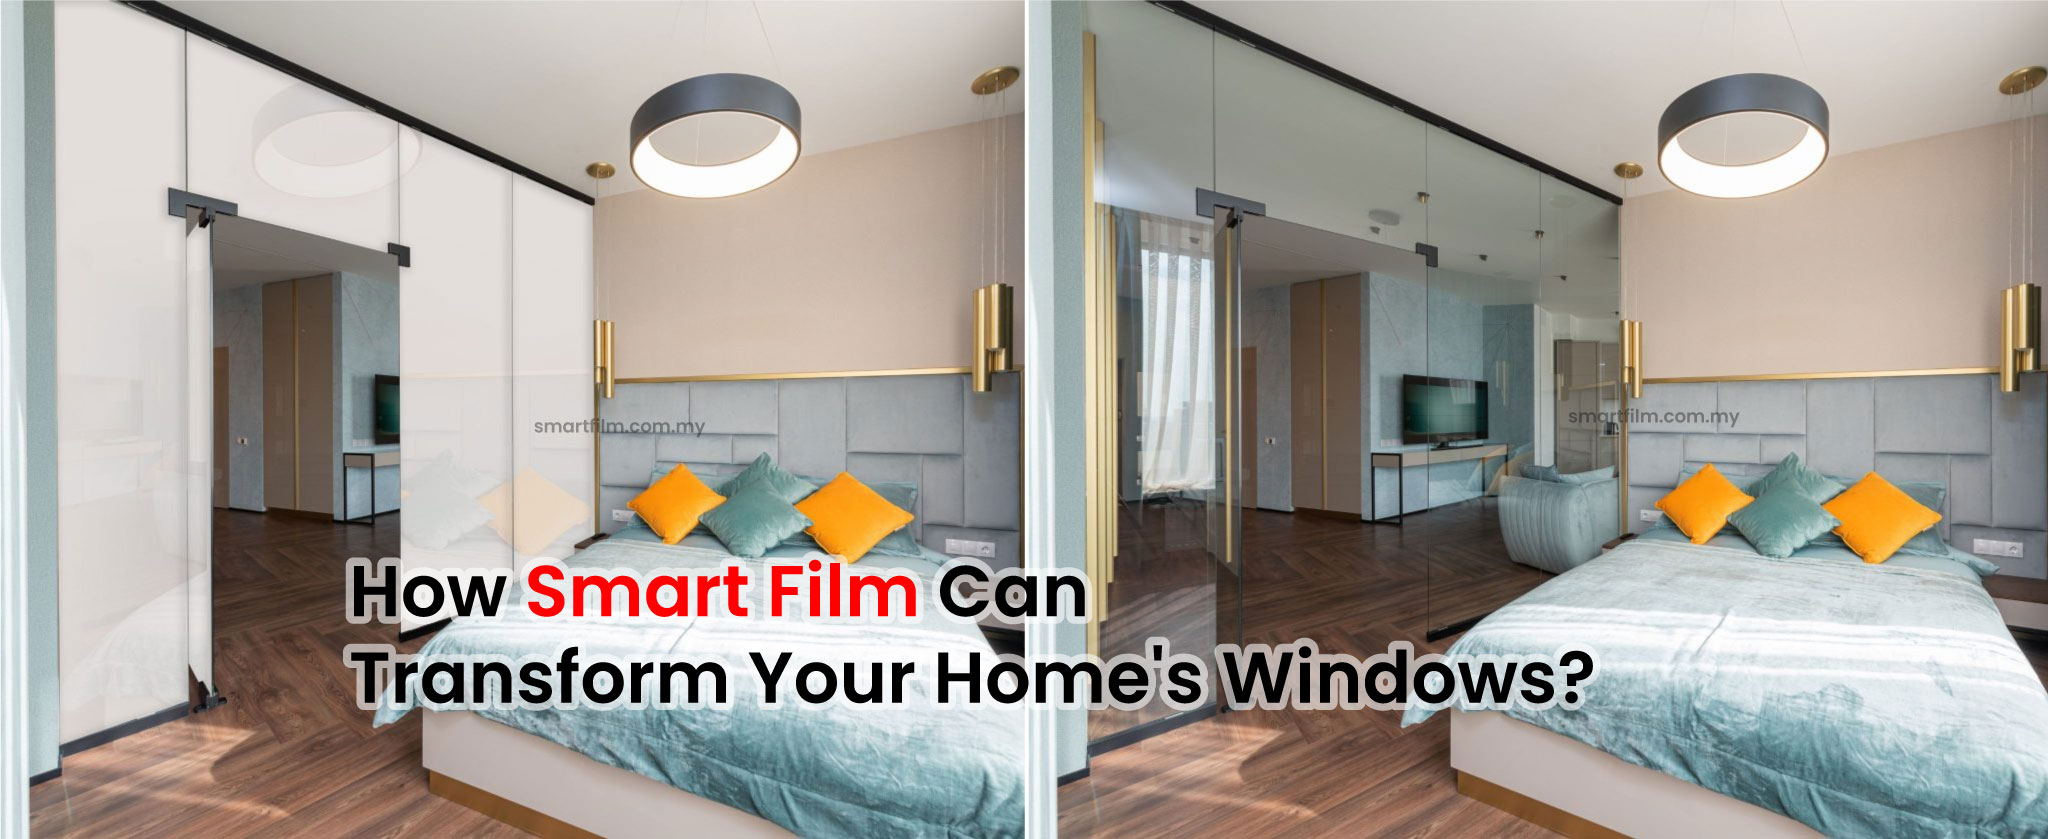 Smart Film at Home Window